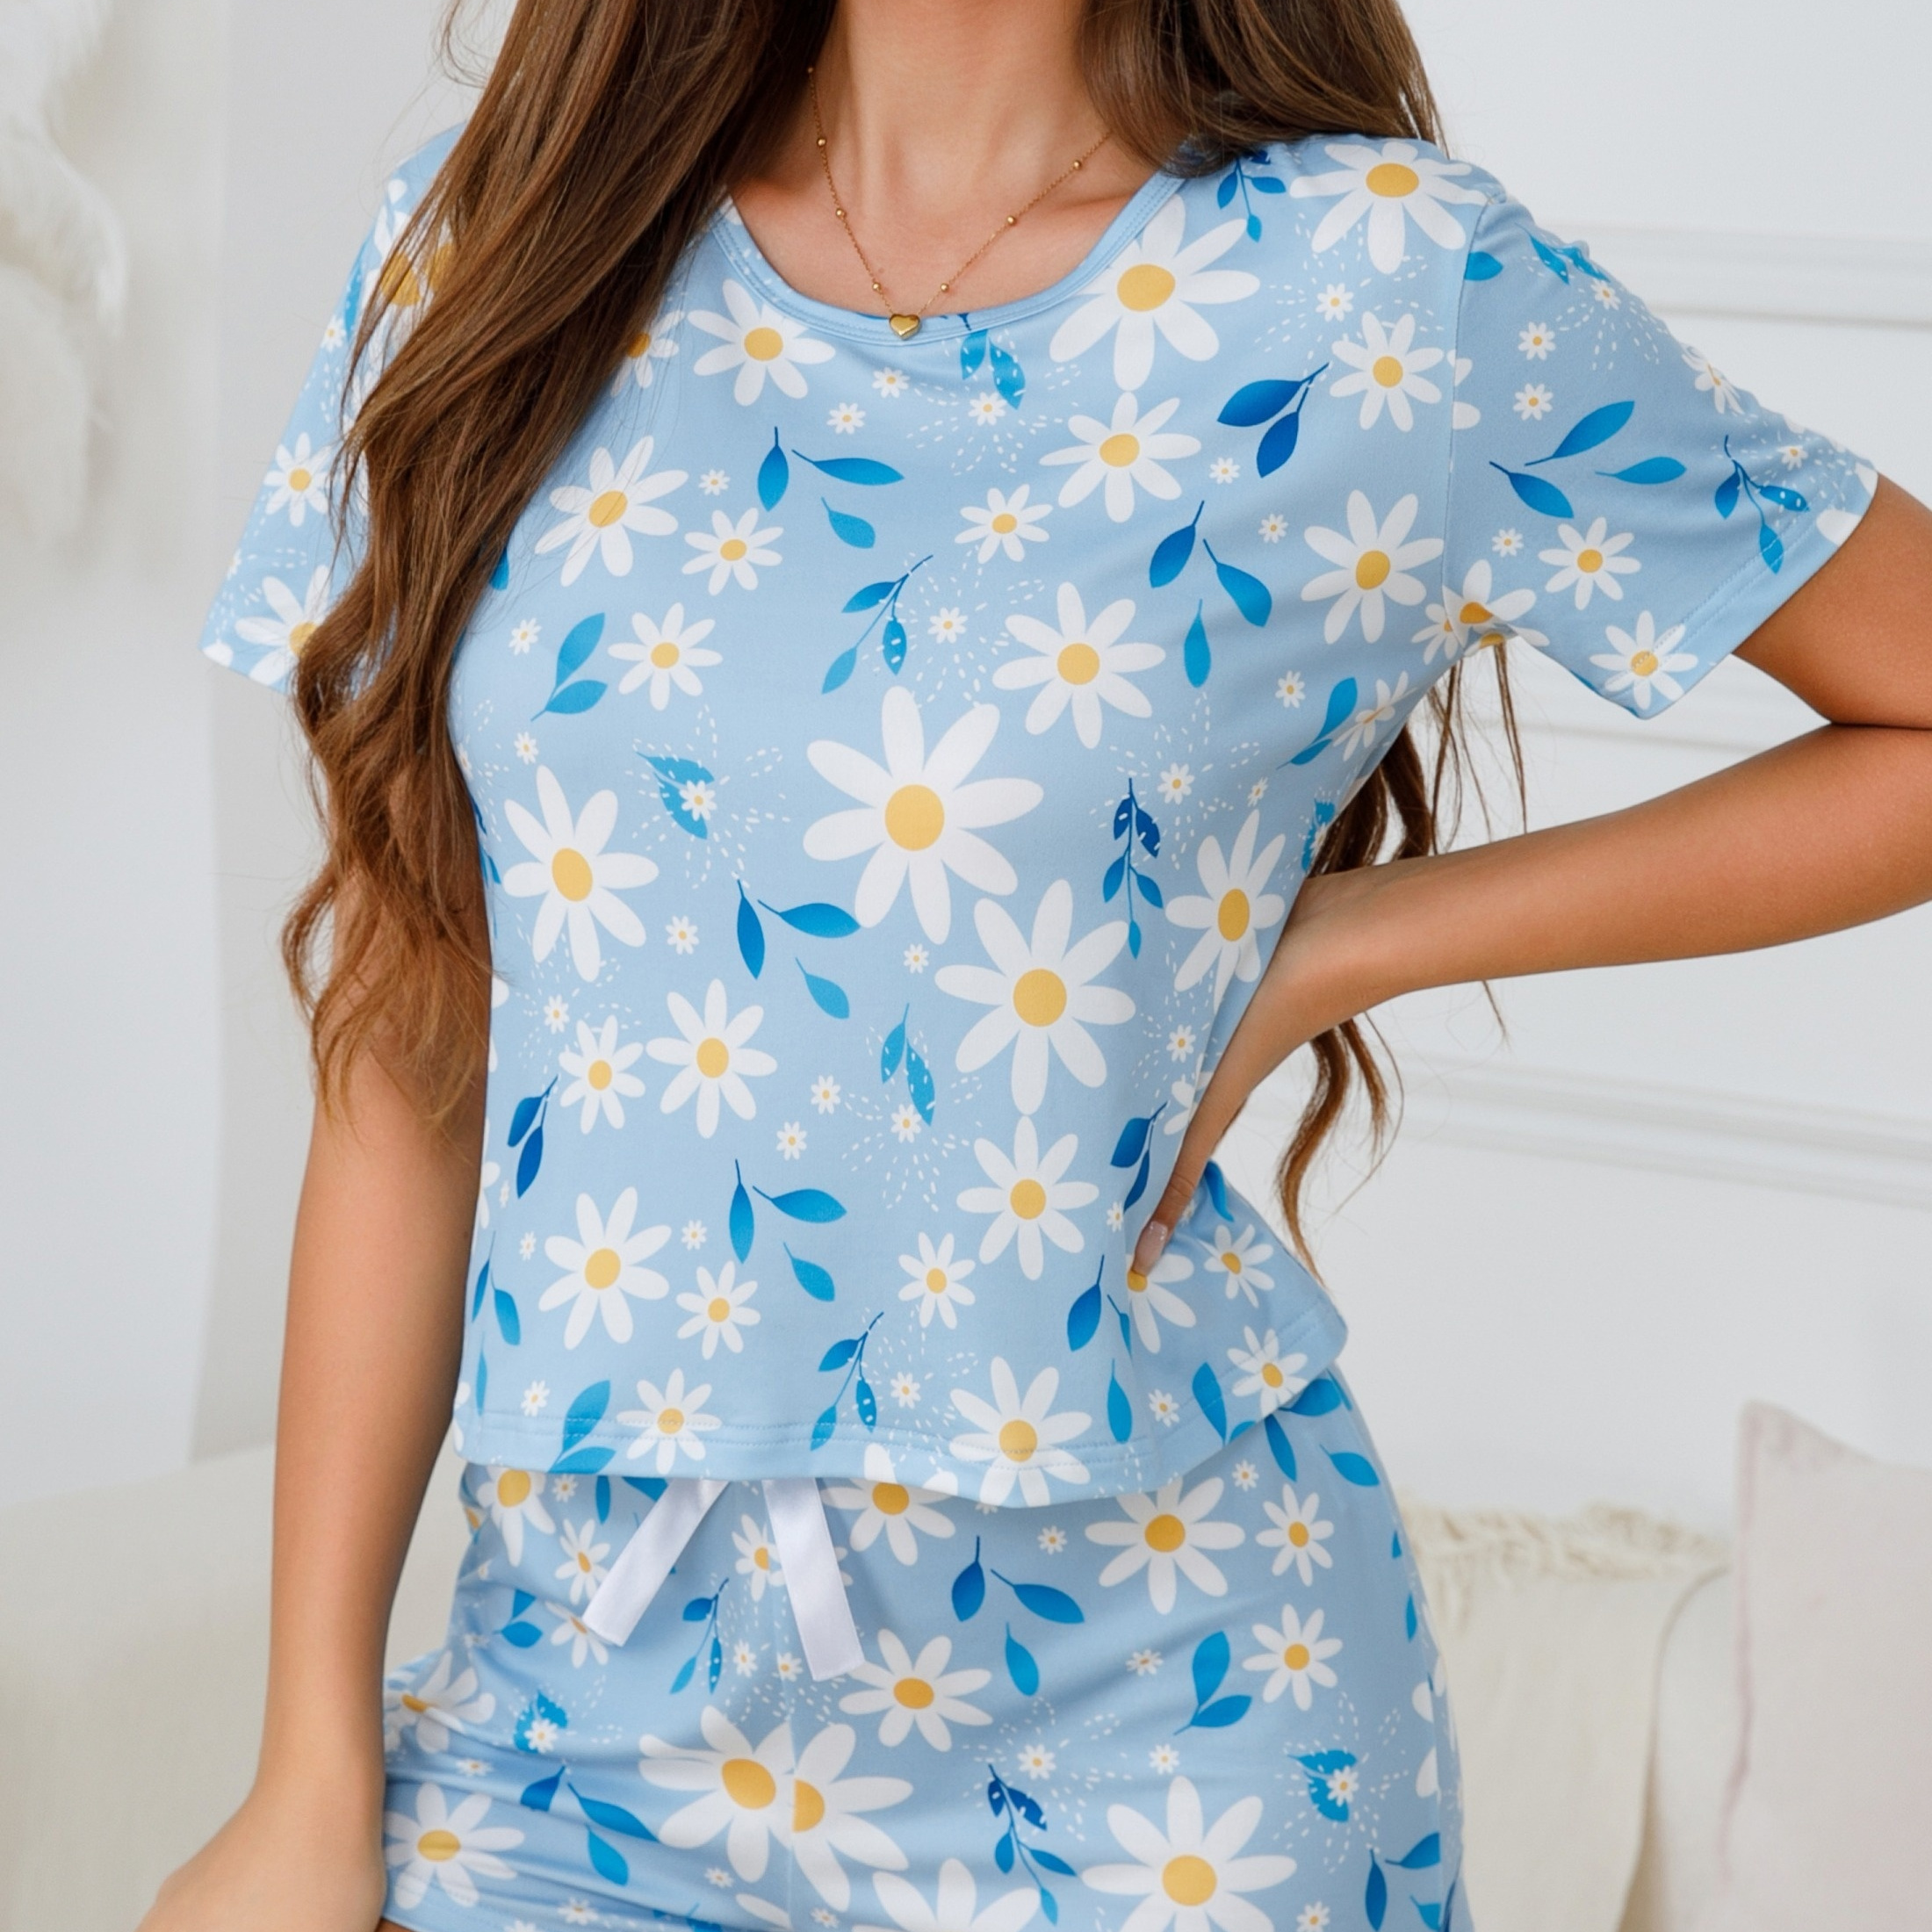 

Women's Floral Print Bow-knot Short Sleeve Pajama Set, Casual Soft Sleepwear, Lounge Shorts And Top Set